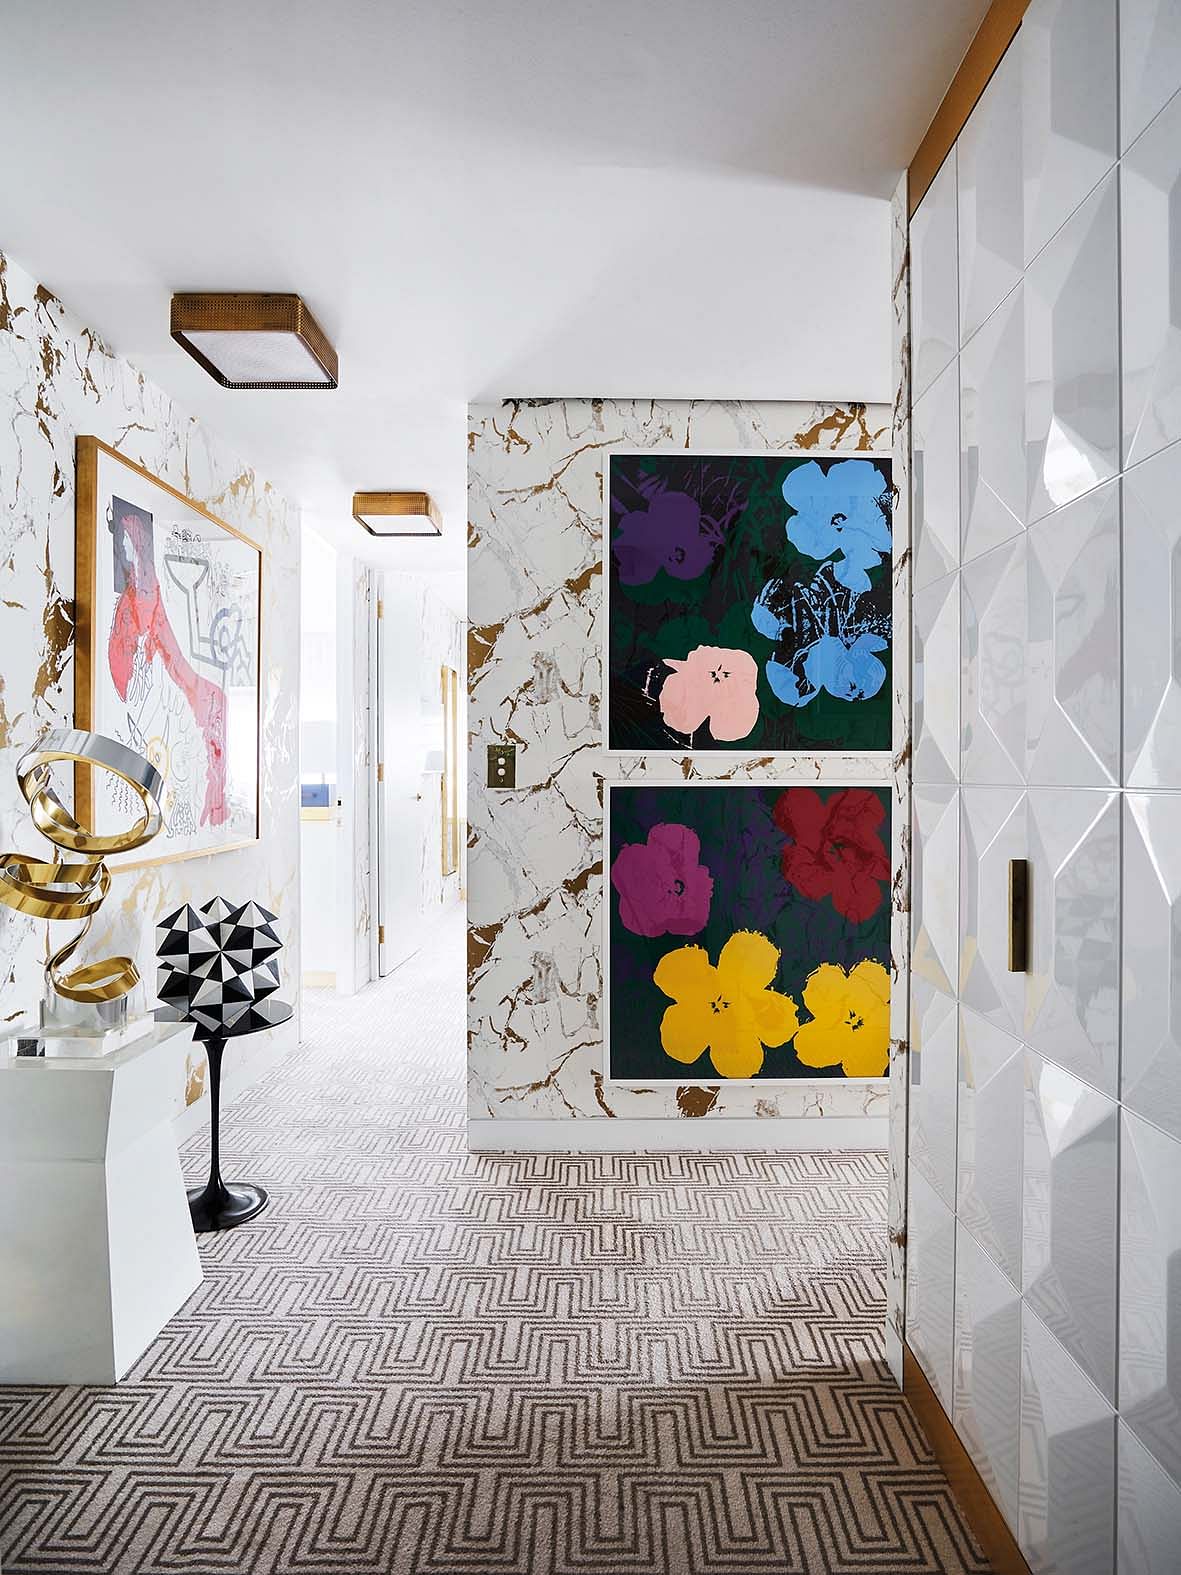 Contemporary artworks line the walls of the home.